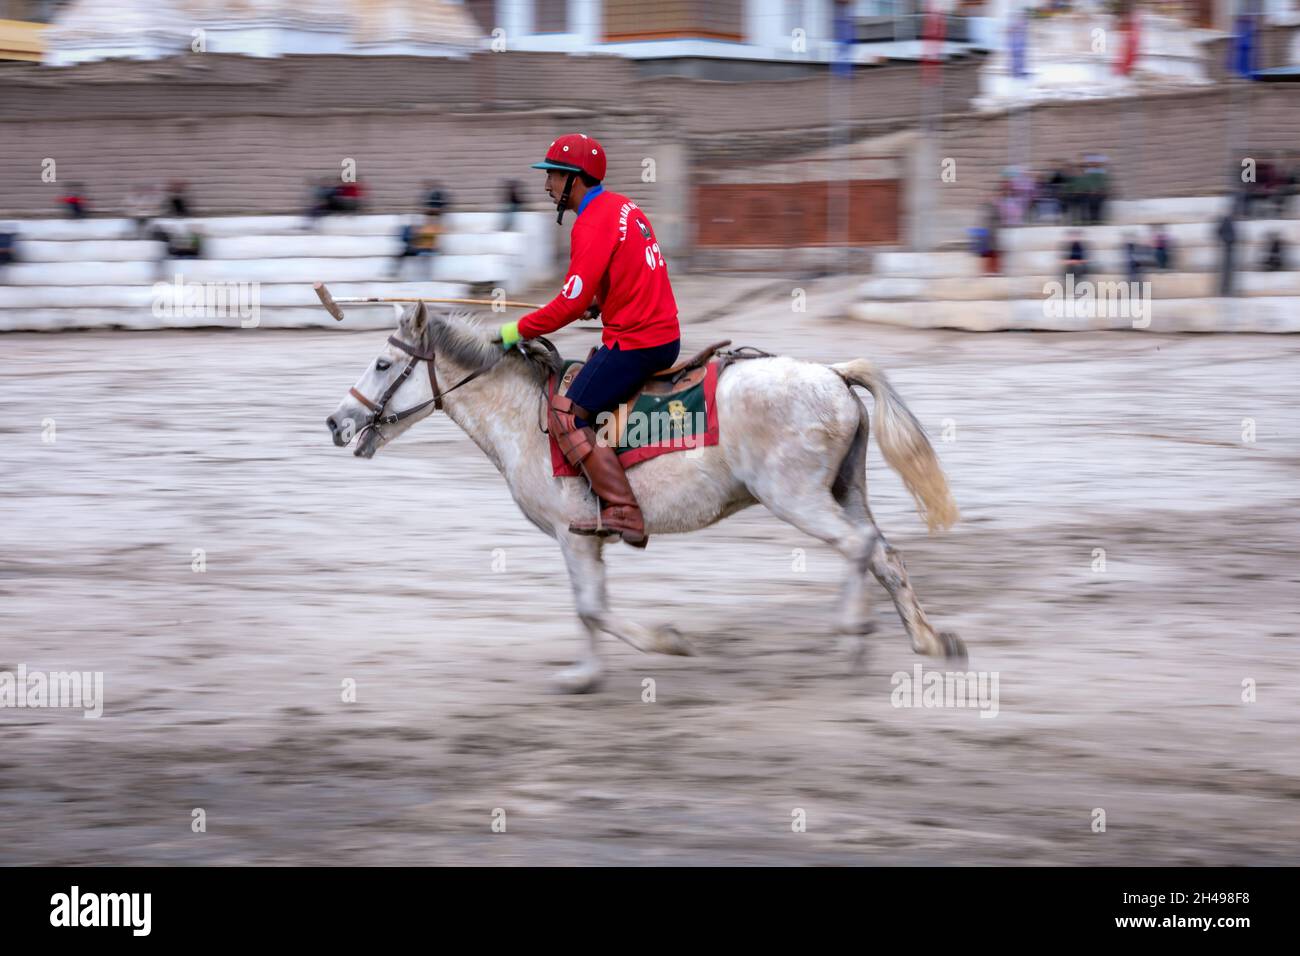 A rider during a polo match in Leh, Ladakh, India Stock Photo